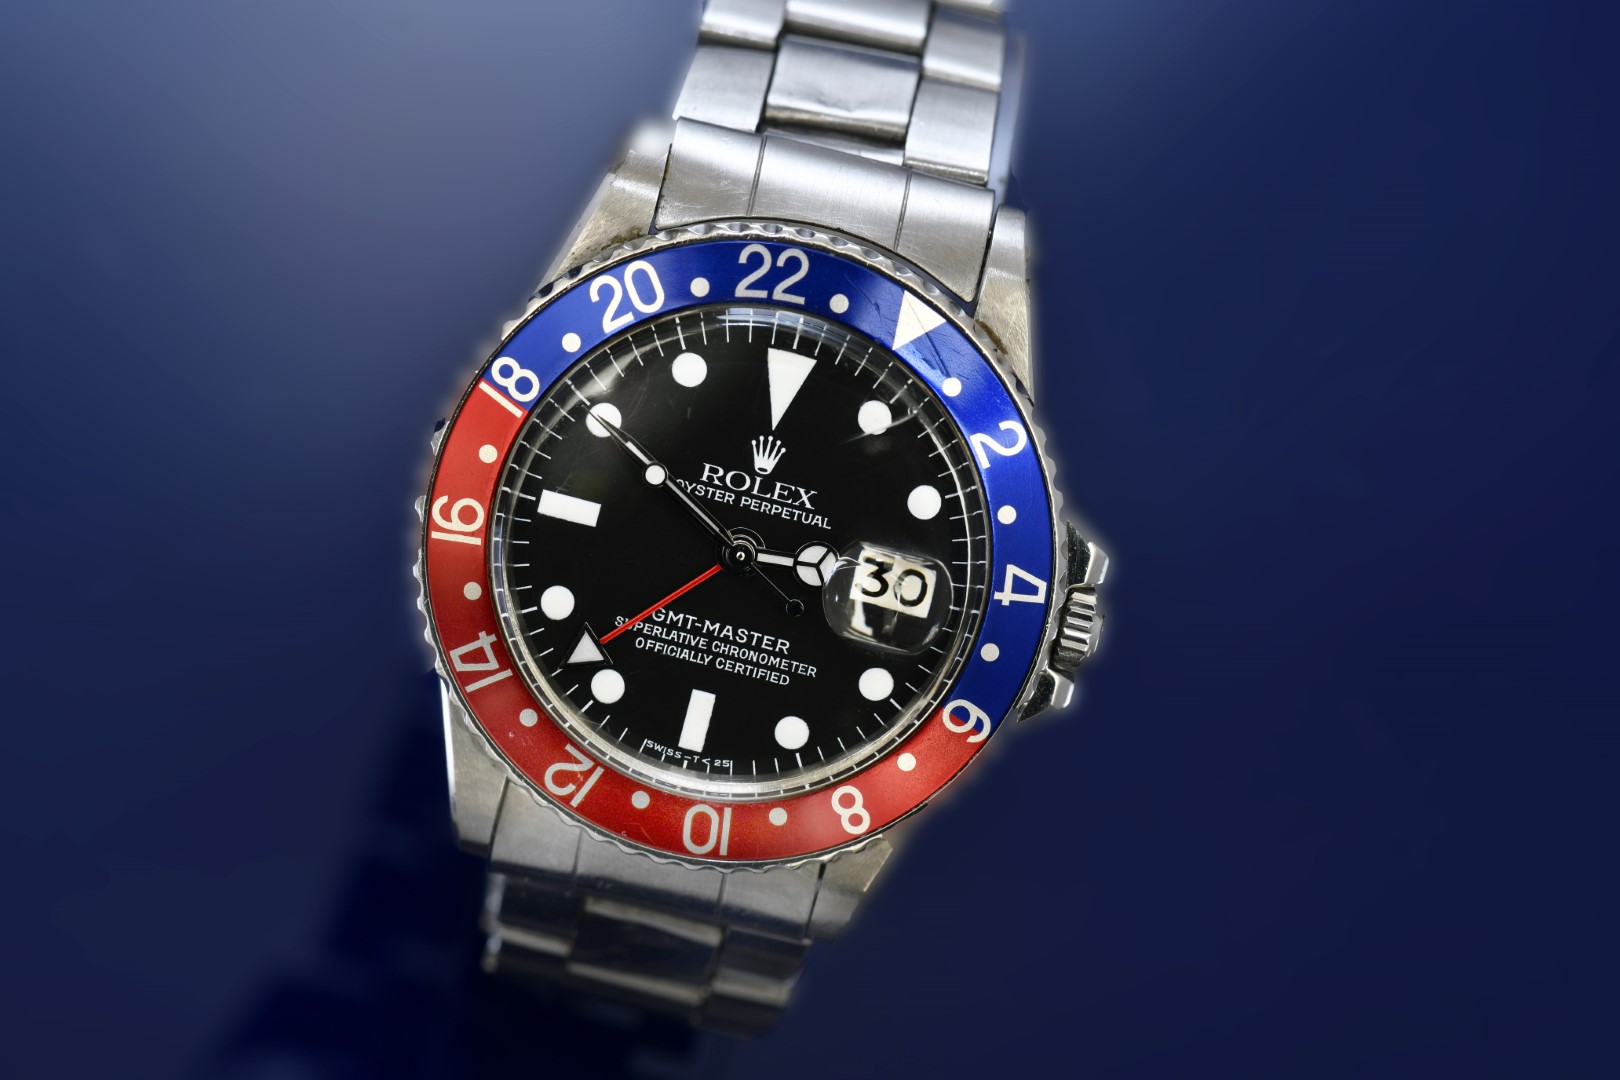 Rolex Oyster Perpetual GMT Master gentleman's automatic wristwatch ref. 1675 with date aperture, - Image 2 of 8